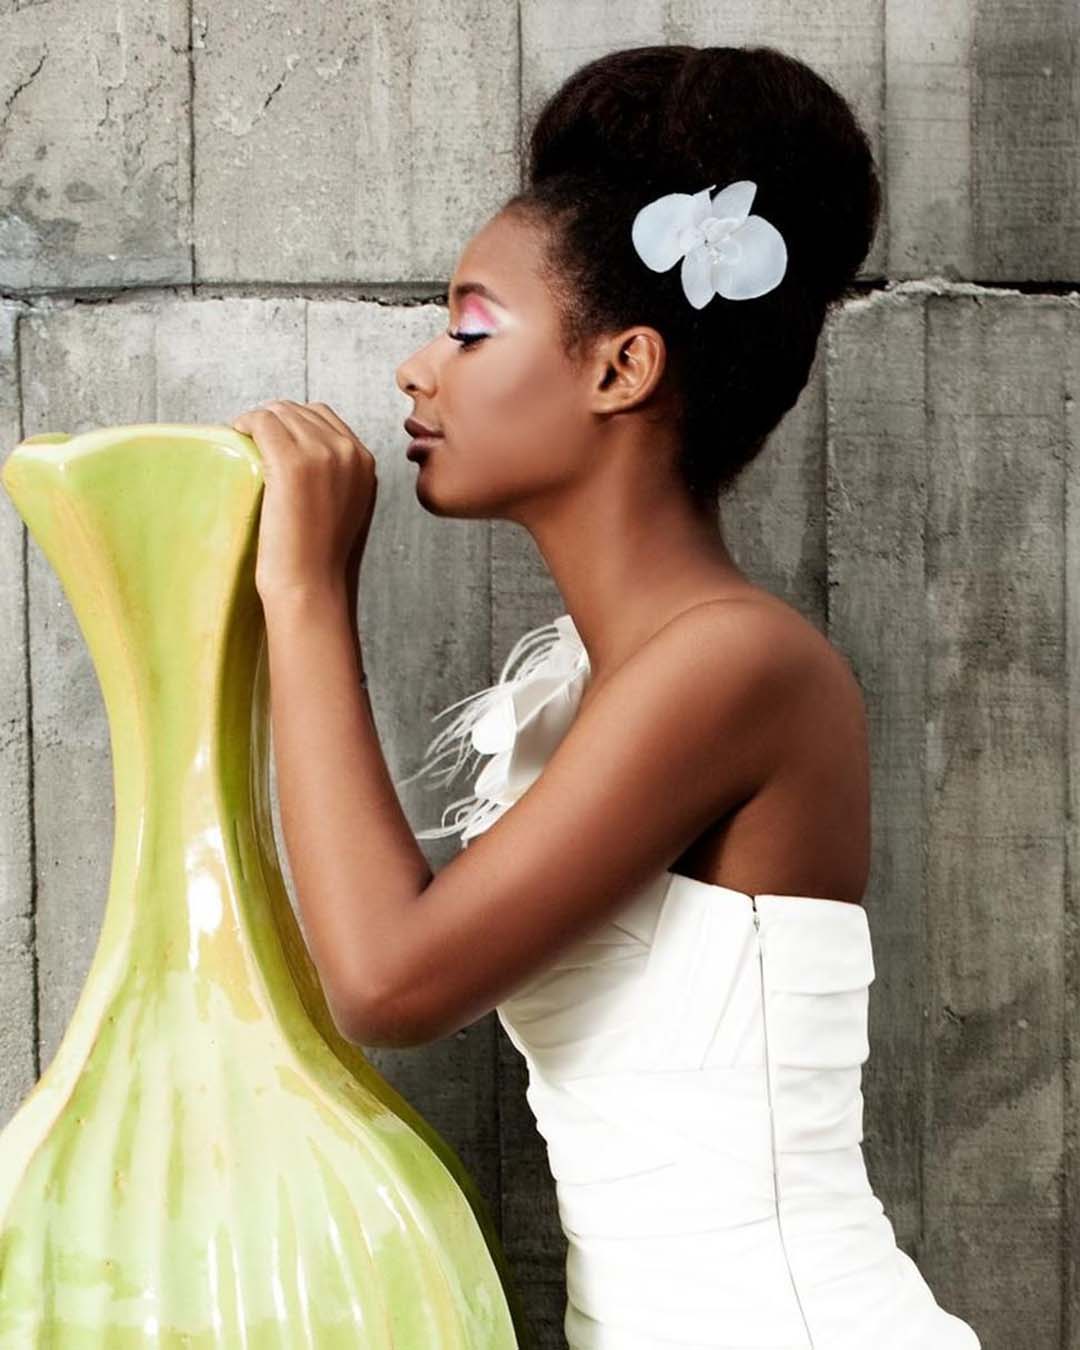 black women wedding hairstyles extremely high bun with flower pin haircomesthebride